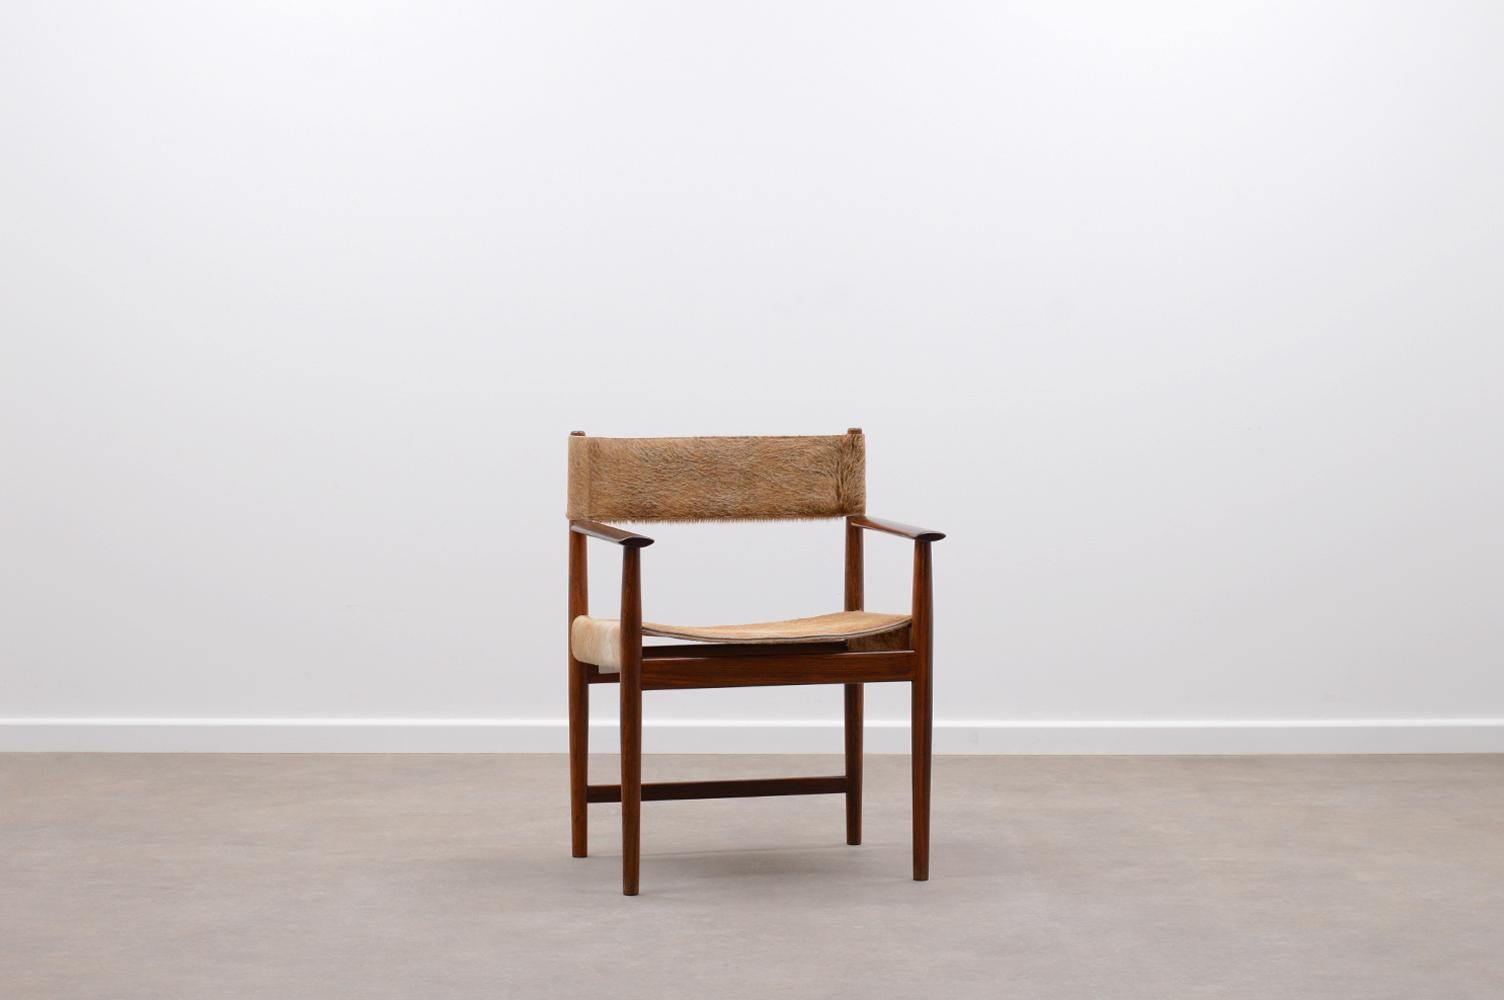 Rosewood and cow hide chair by Kurt Østervig for Sibast, 60s Denmark. Solid Rosewood frame and cow hide leather. Cow hide is reupholstered and a unique combination. The armrests are refinished. Signed with Sibast logo. In very good vintage